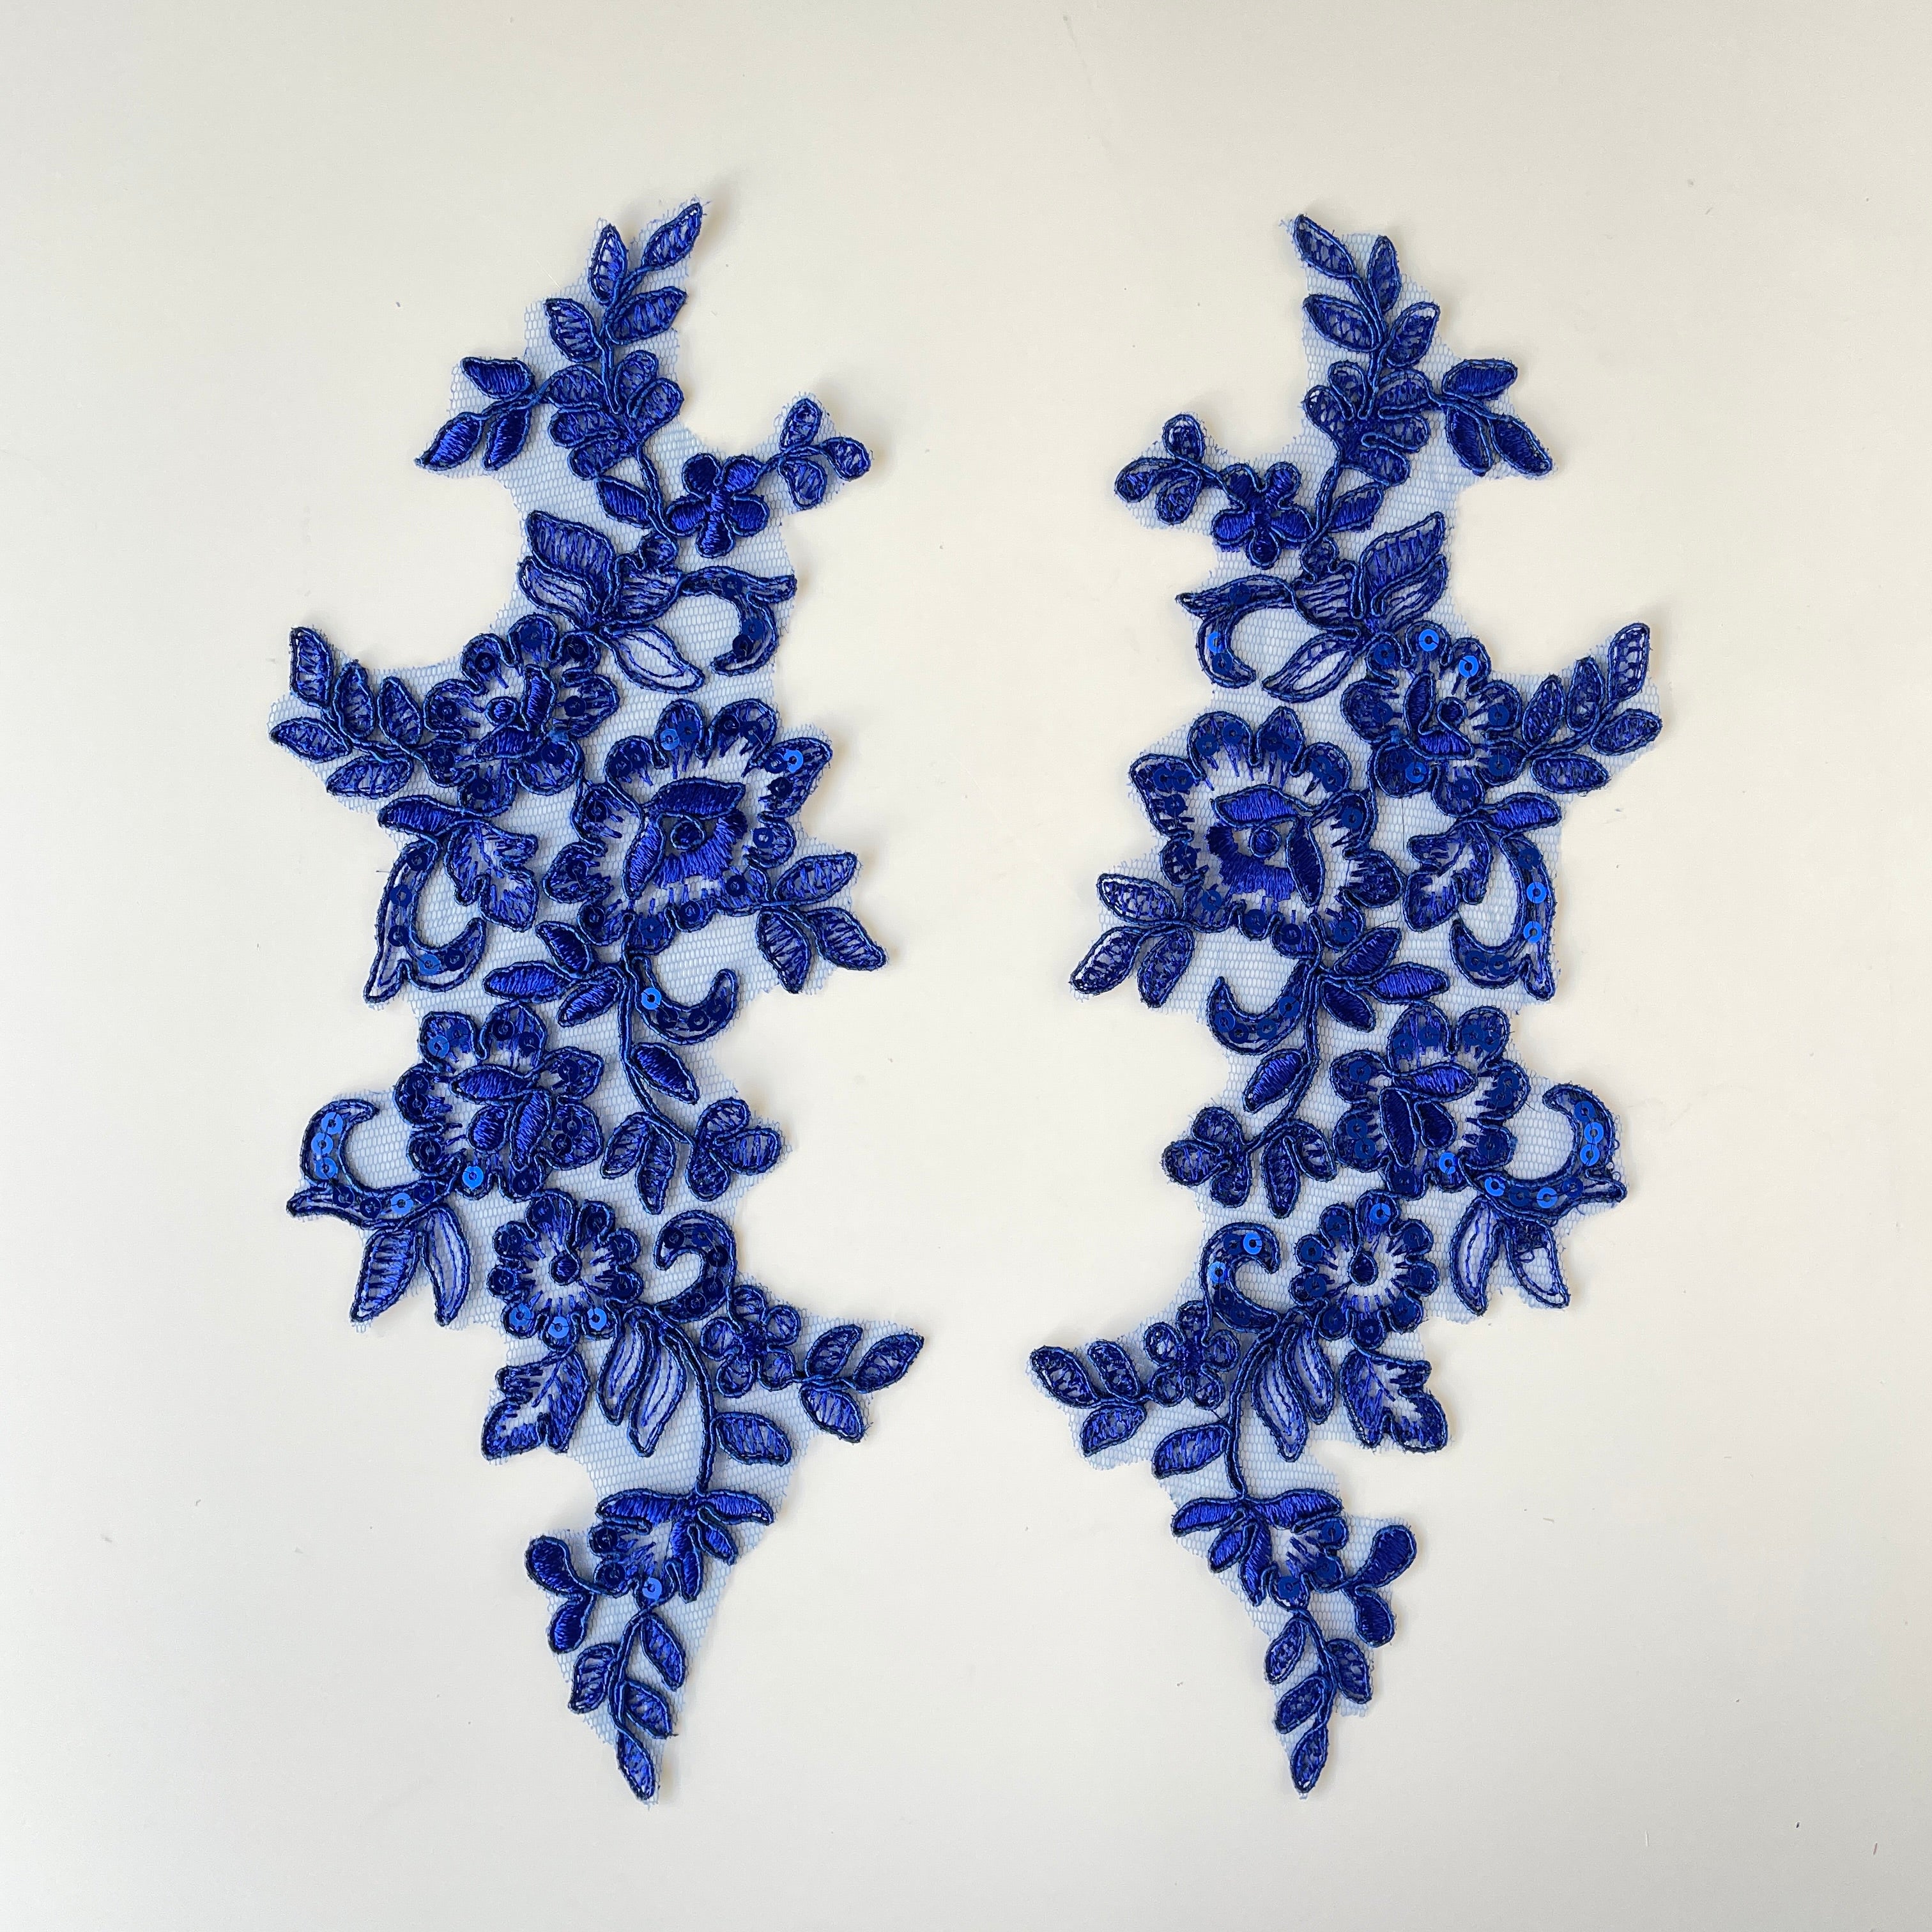 Mirrored pair of royal blue appliques sprinkled with royal blue sequins on the petals in the floral design.  The appliques are laying flat on a white background.